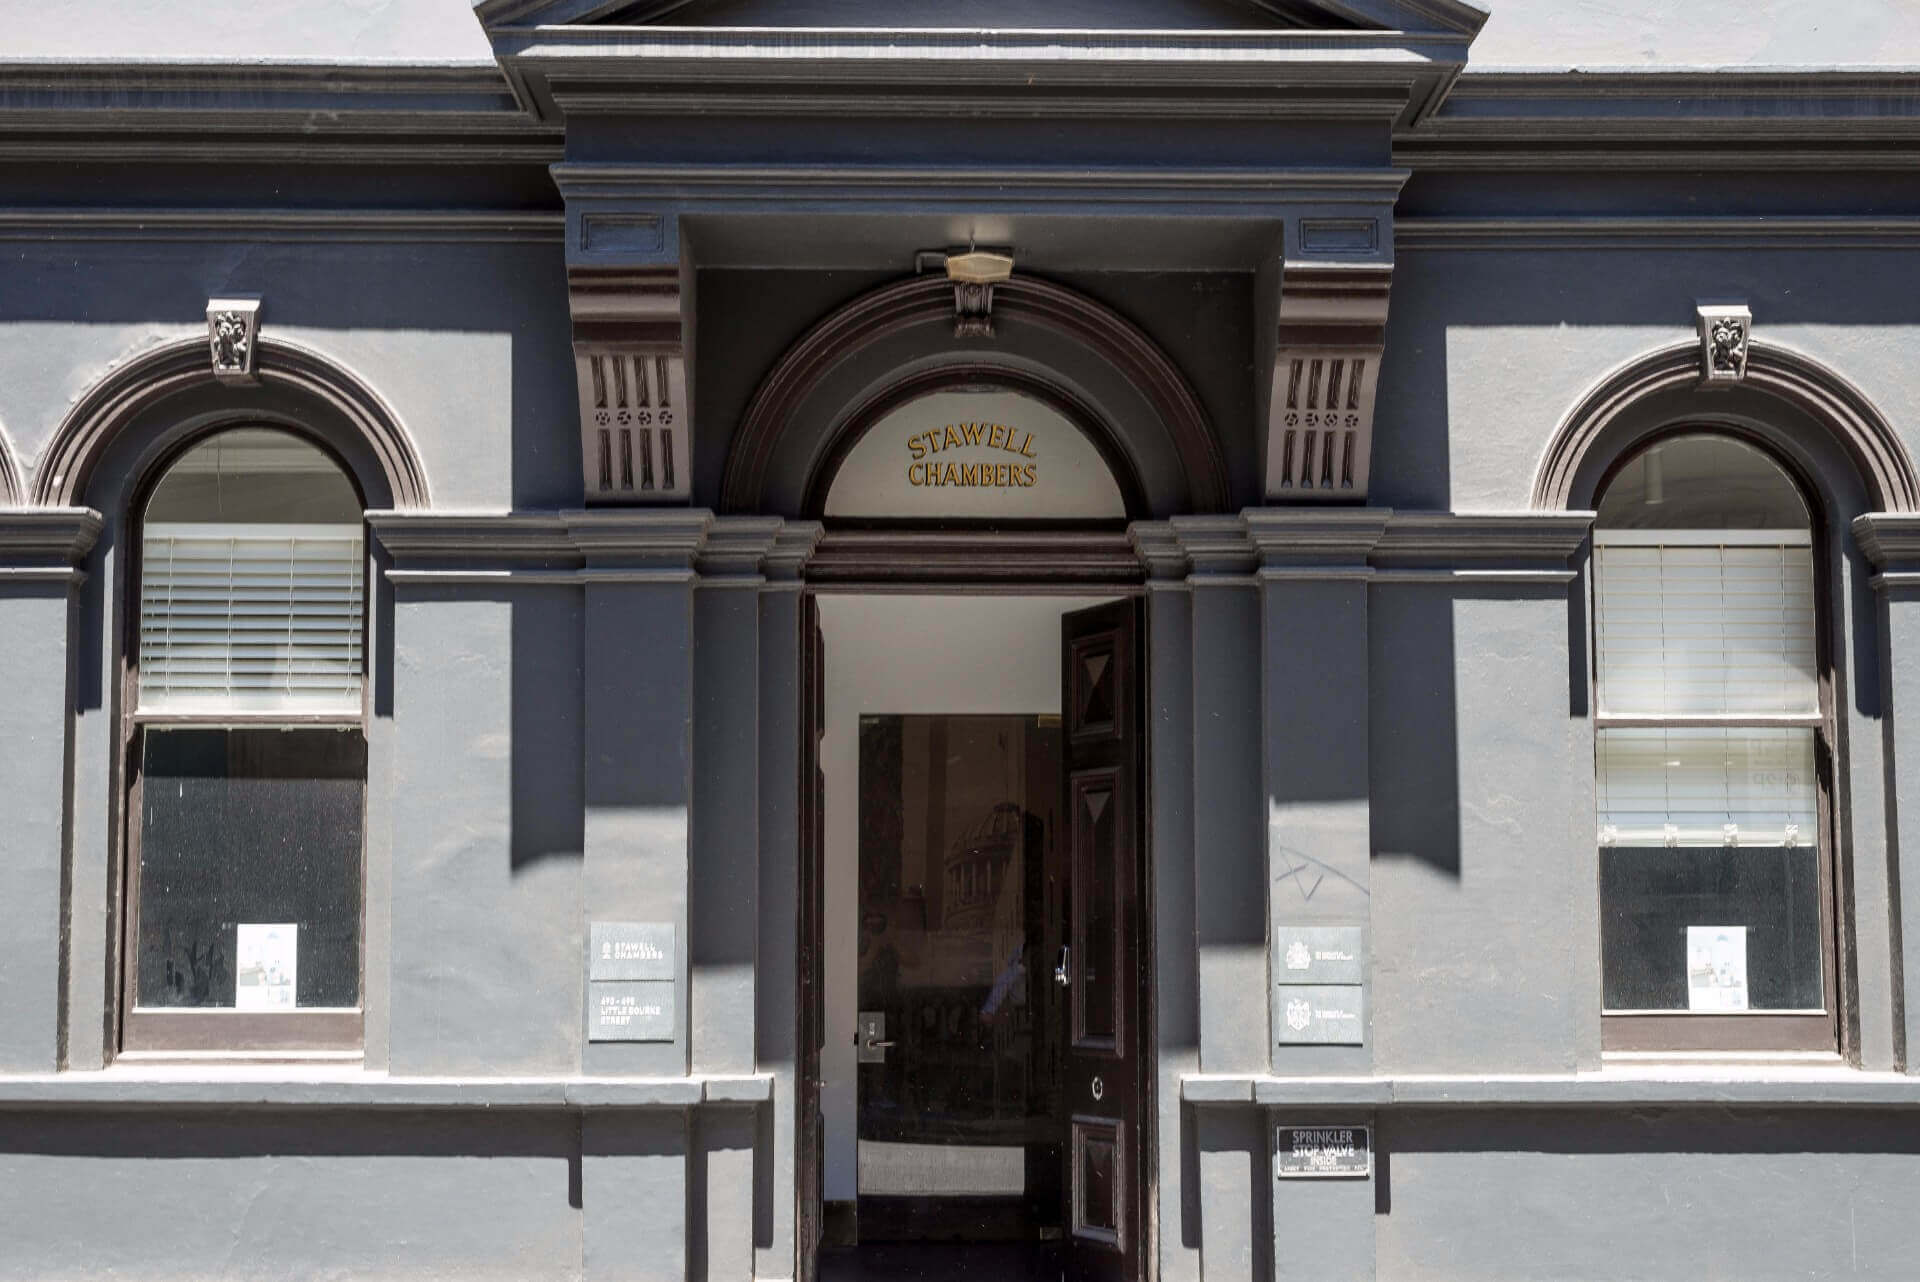 street view of stawell chamber front